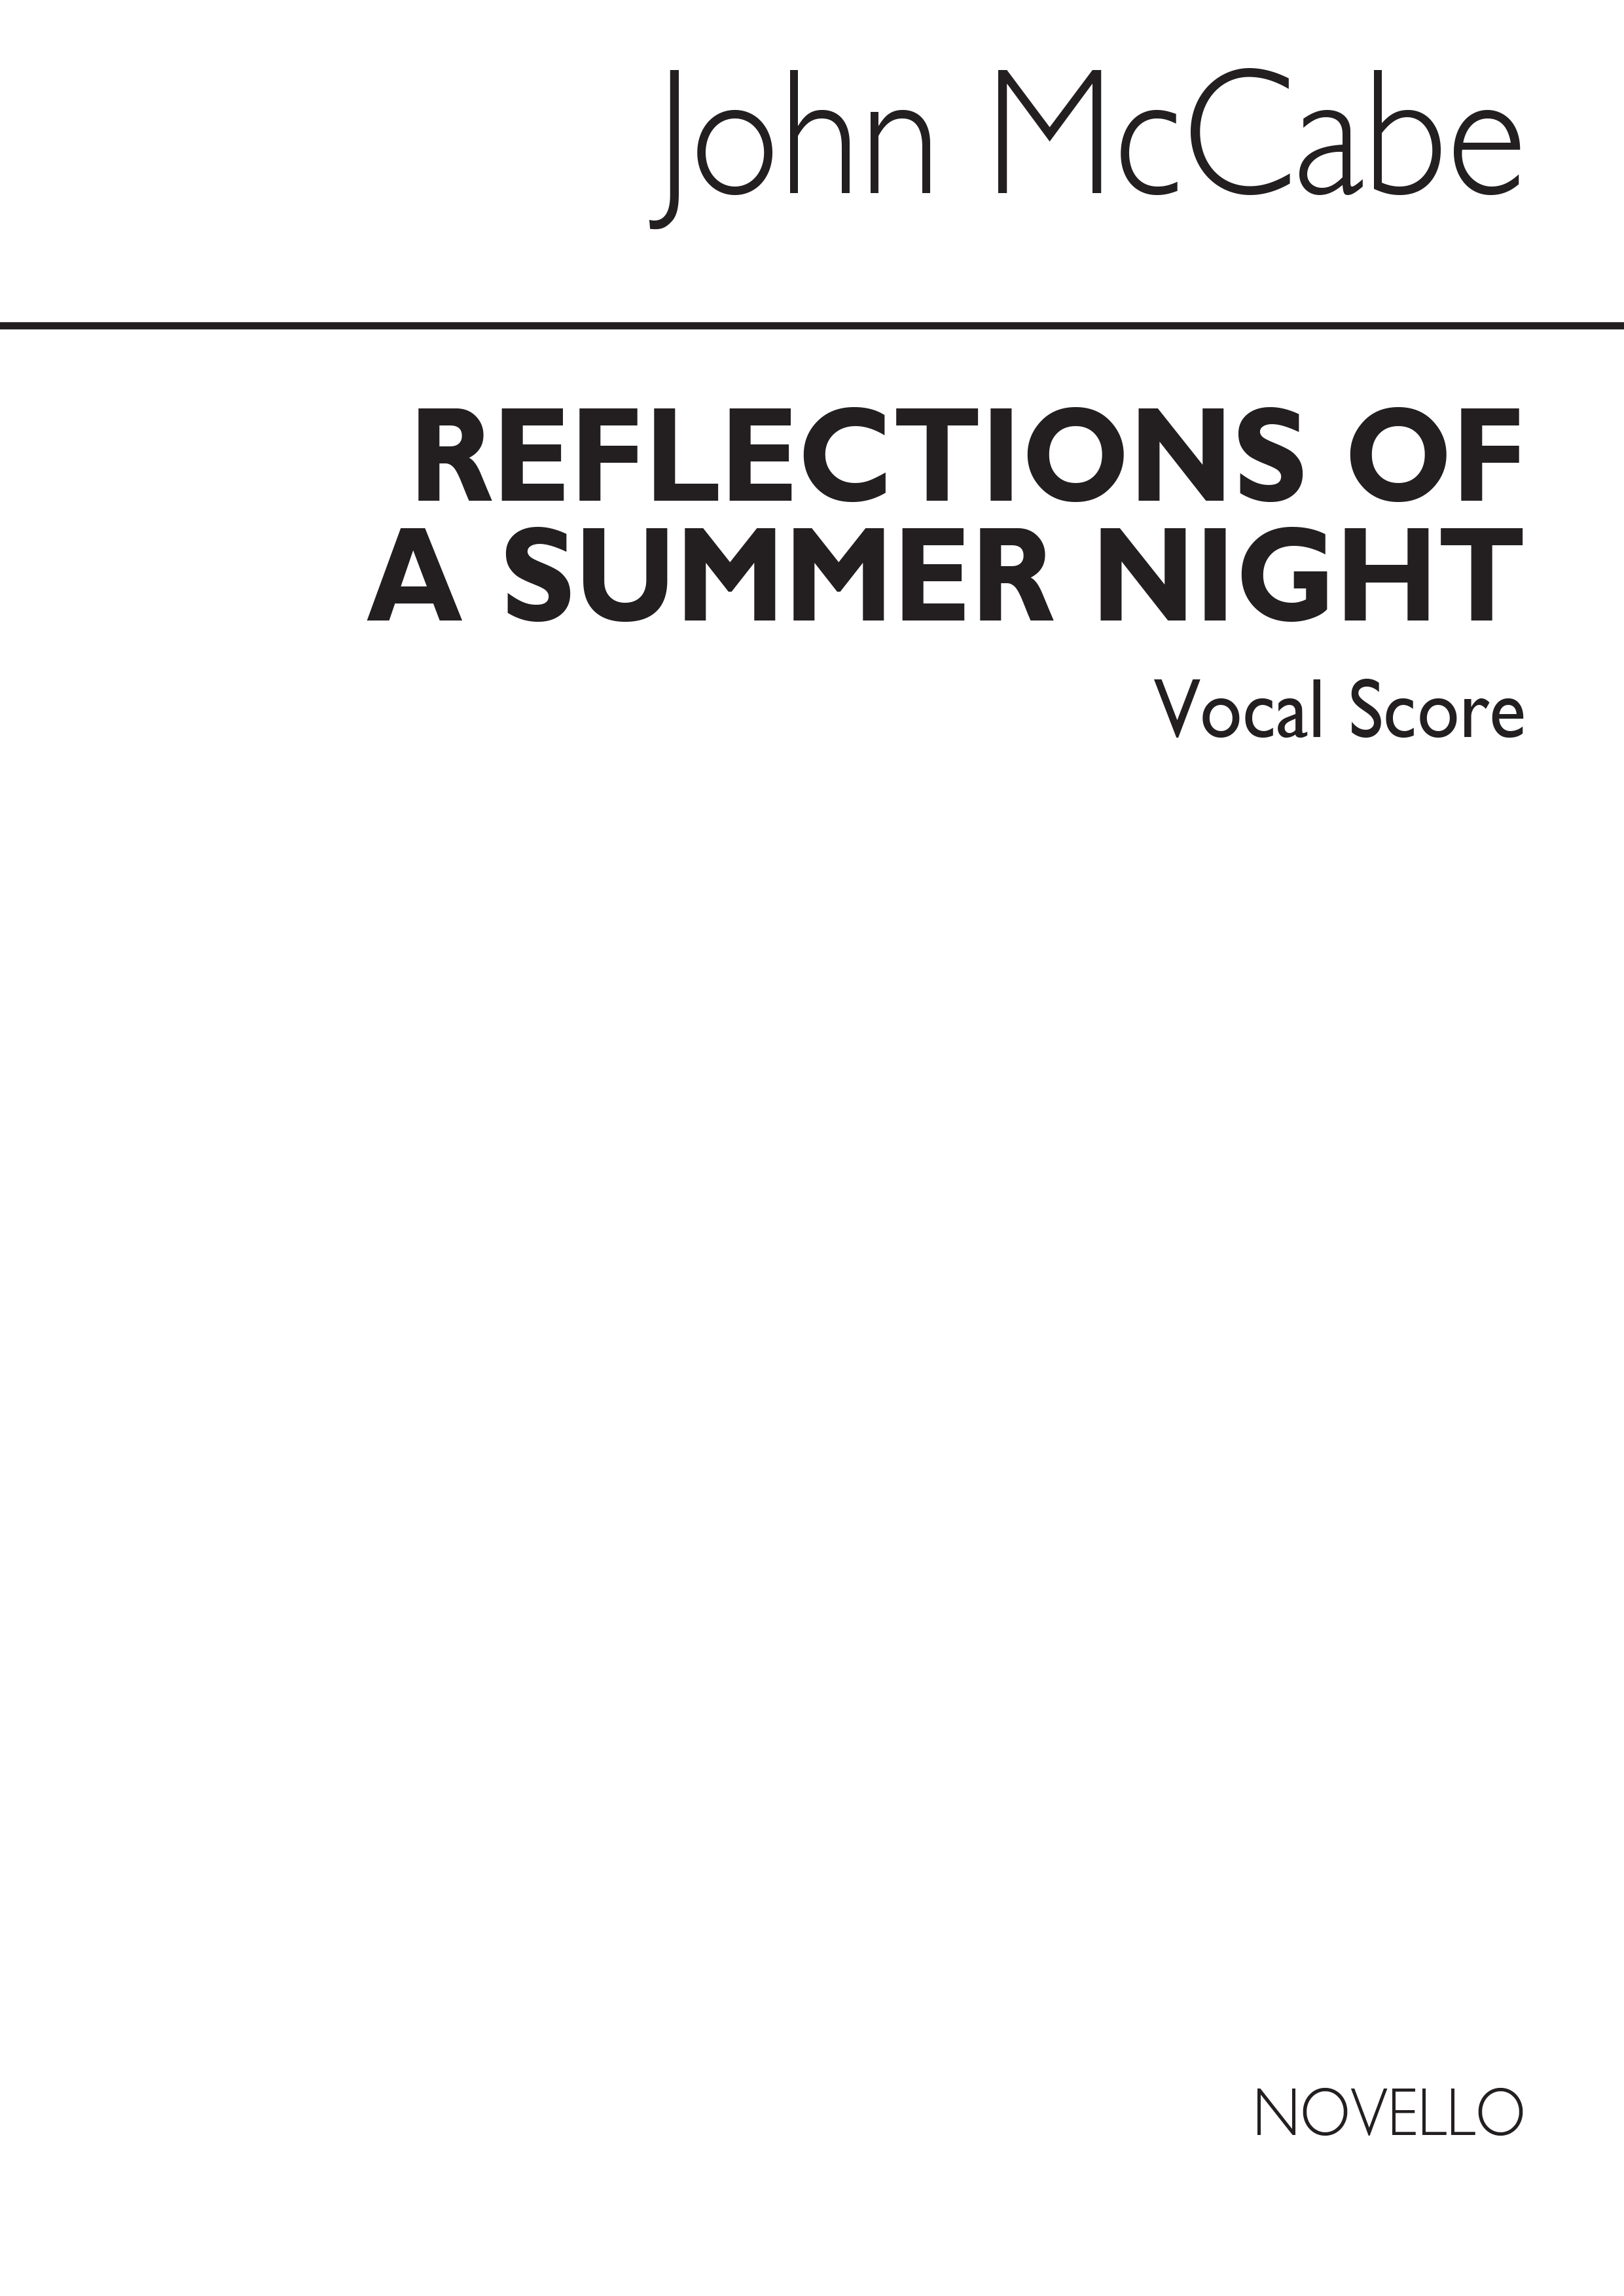 McCabe: Reflections Of A Summer Night (Vocal Score)